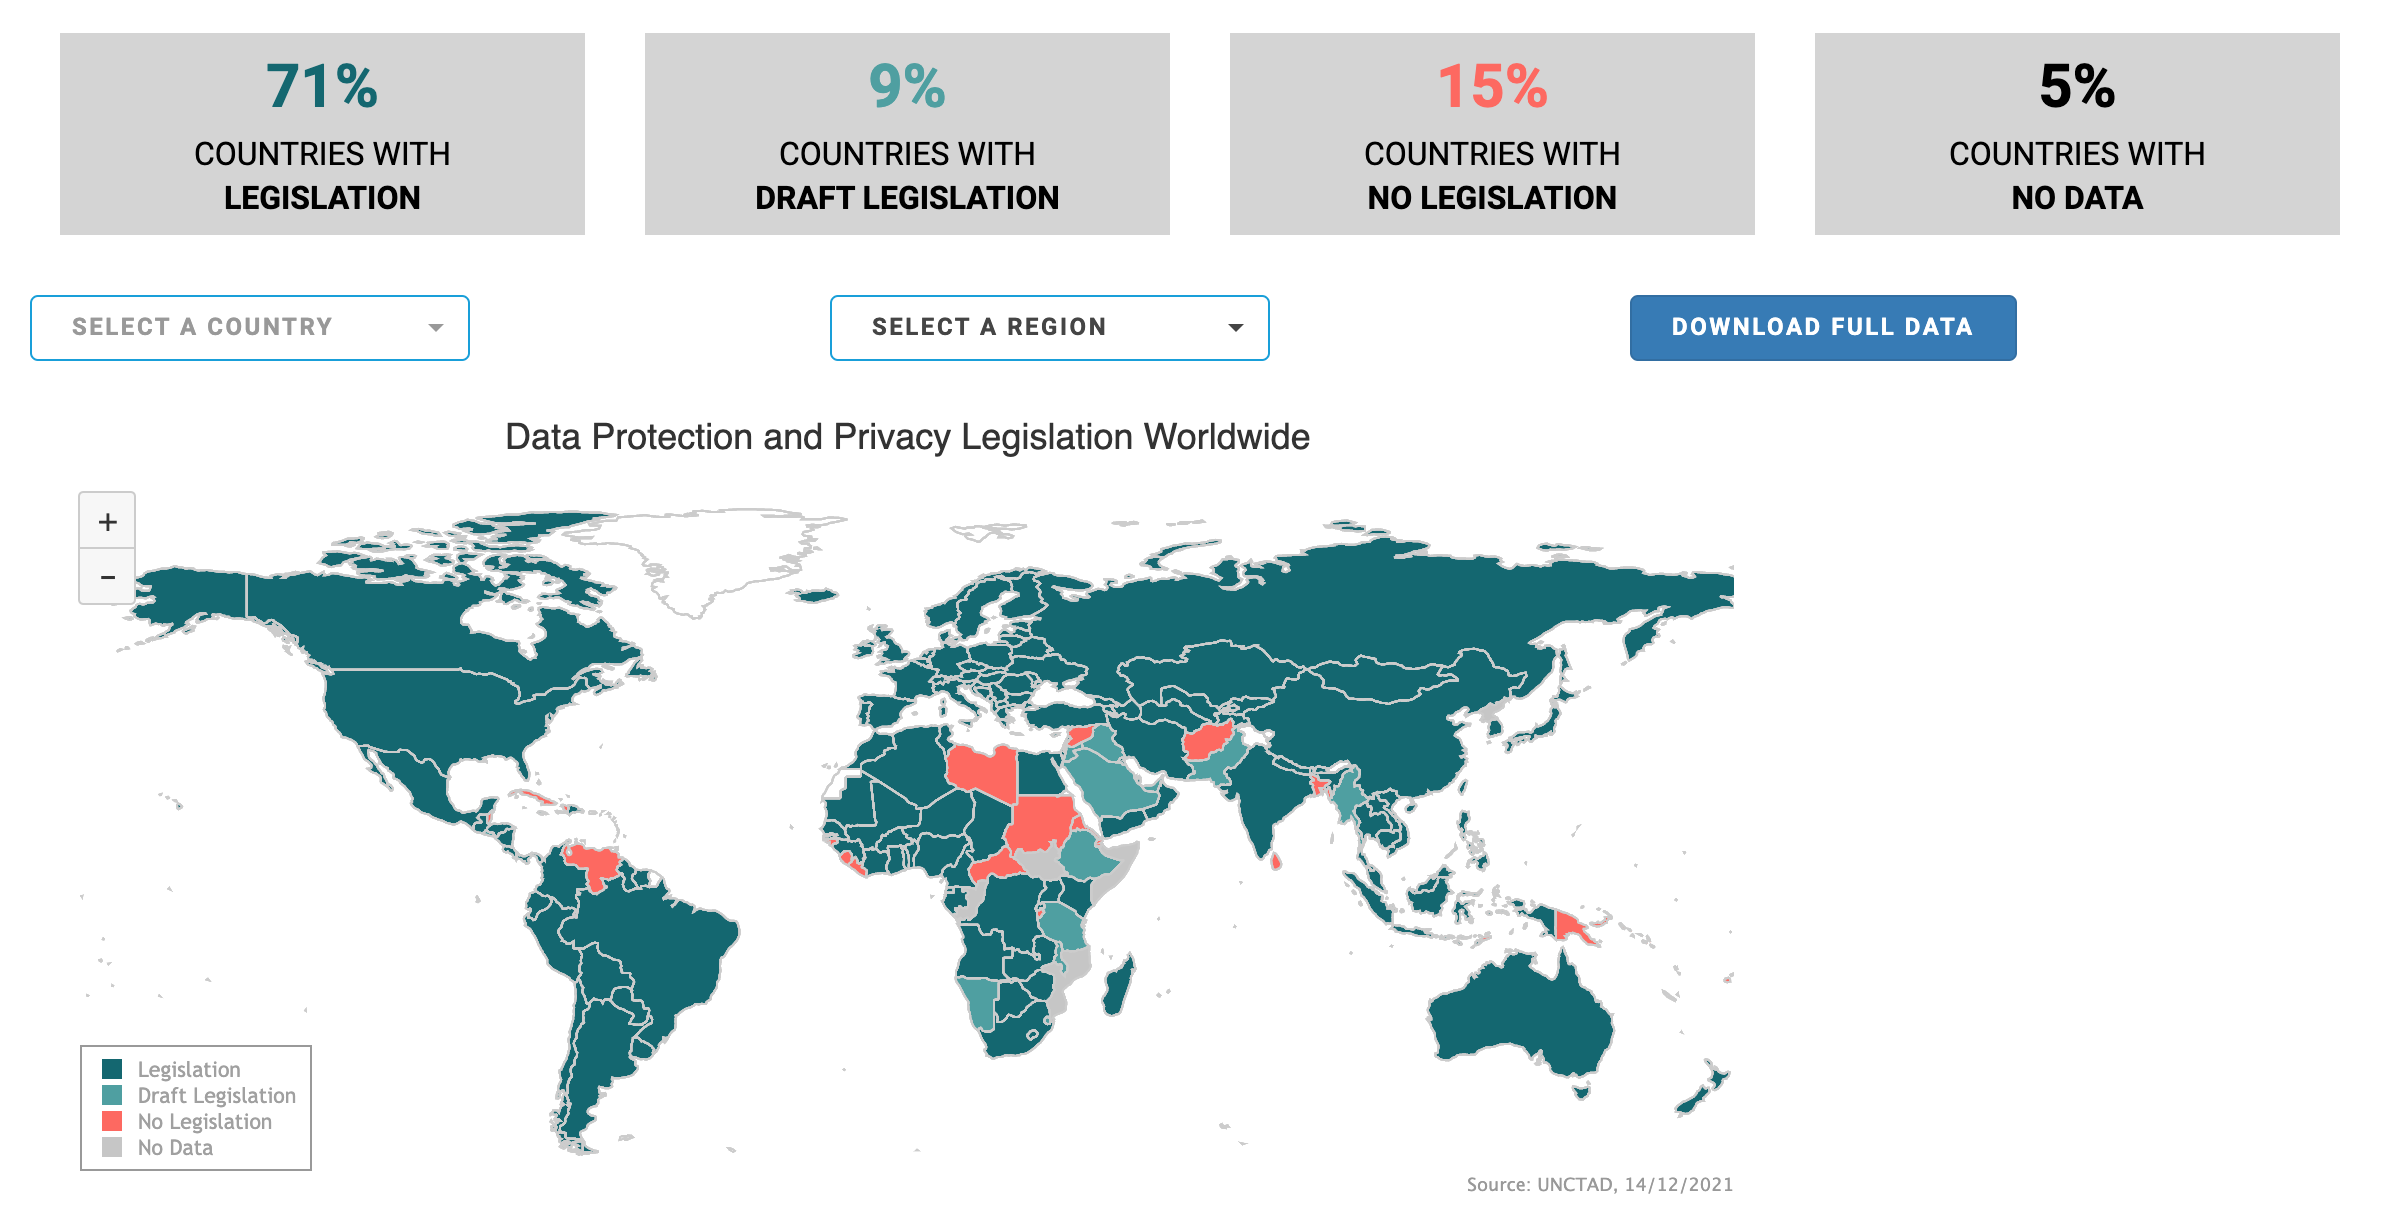 Data protection and privacy legislation worldwide